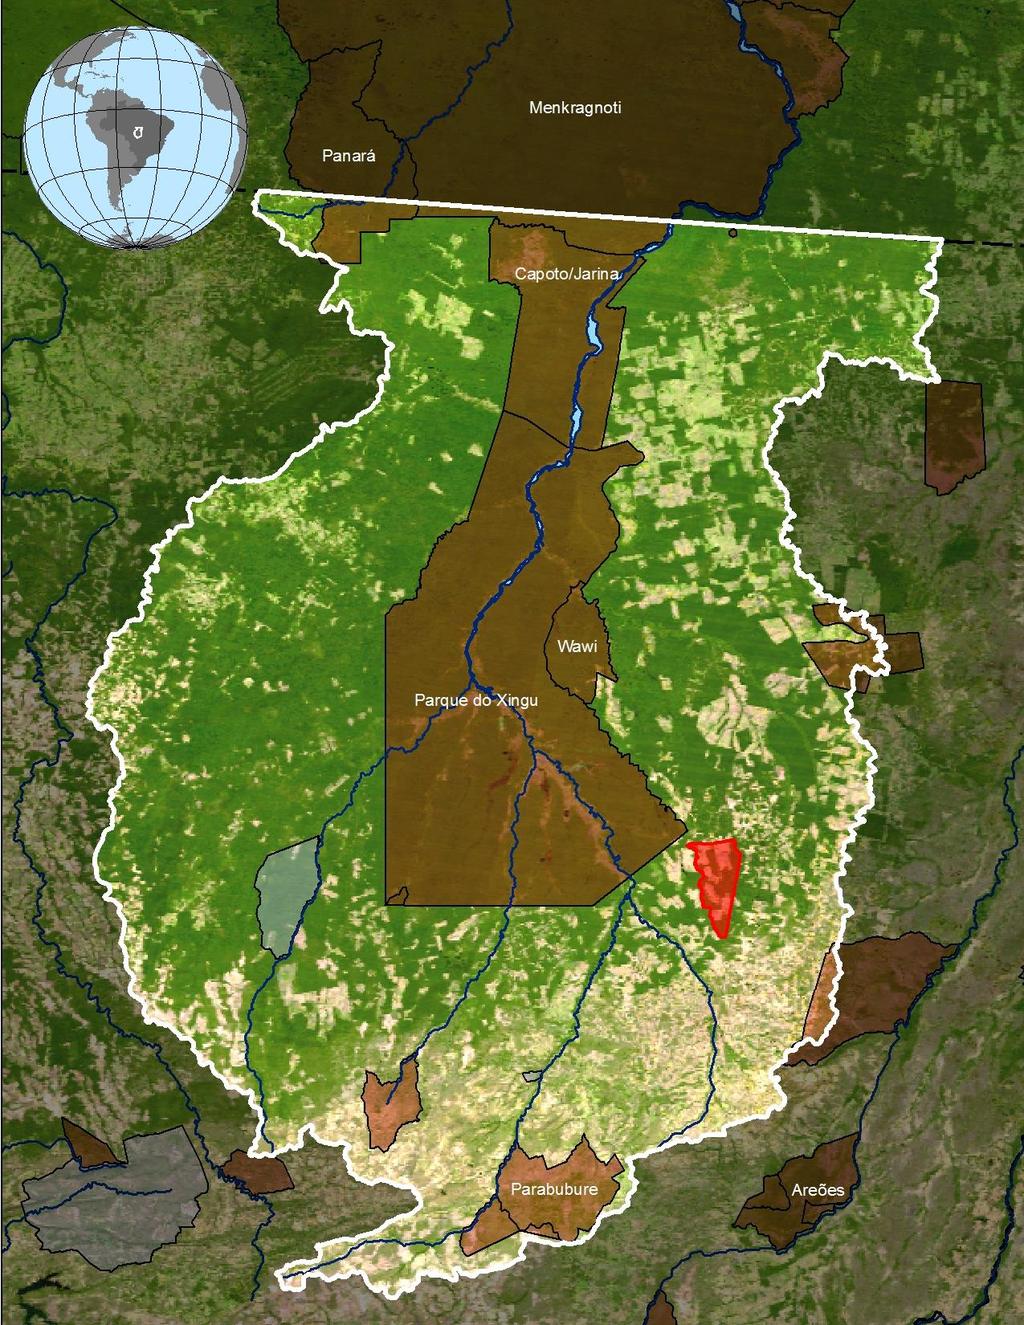 Upper Xingu 176,000 km 2 area Forested indigenous reserve surrounded by mosaic landscape.